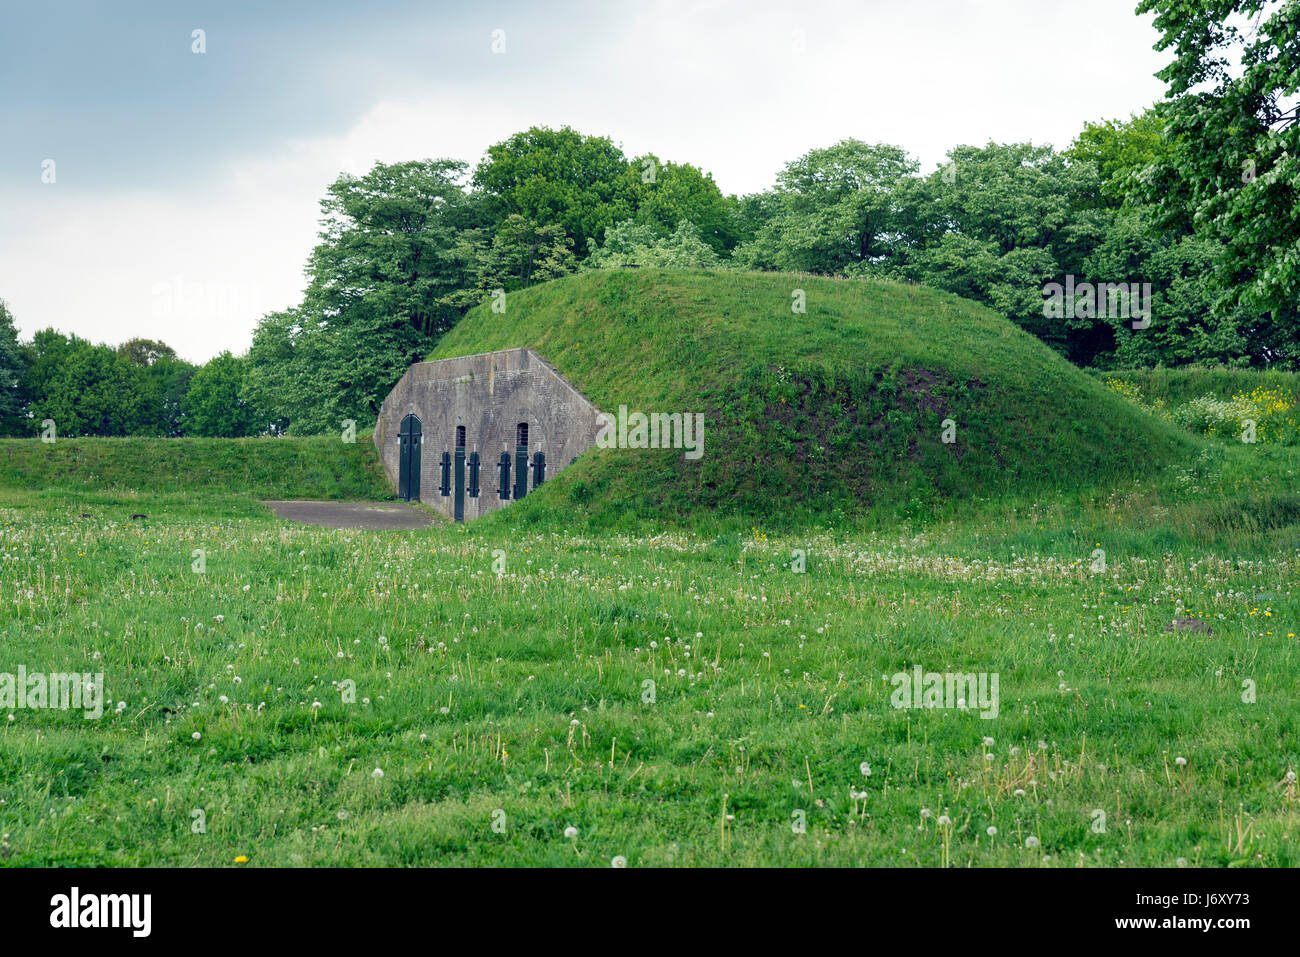 NAARDEN - NETHERLANDS - MAY 13, 2017: Naarden is an example of a star fort, complete with fortified walls and a moat. The moat and walls have been res Stock Photo